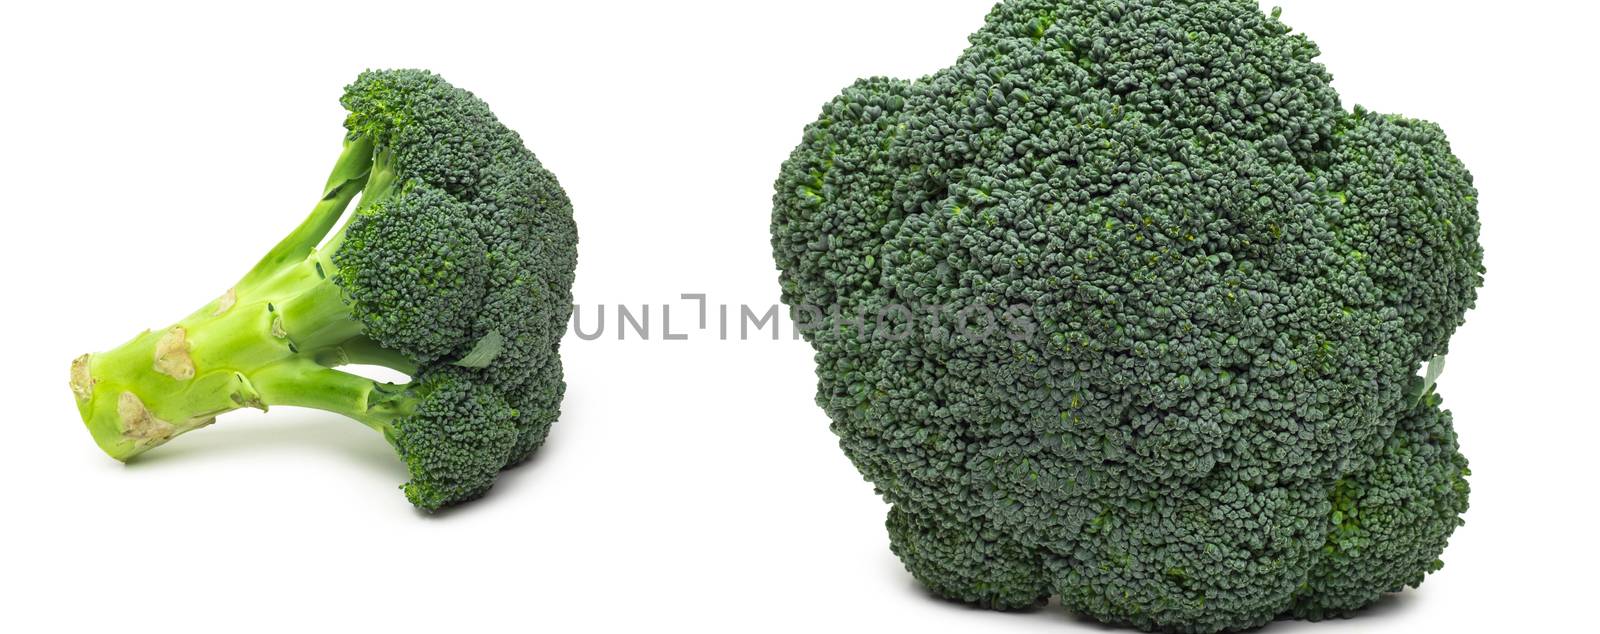 Broccoli isolated on white background by ozaiachin